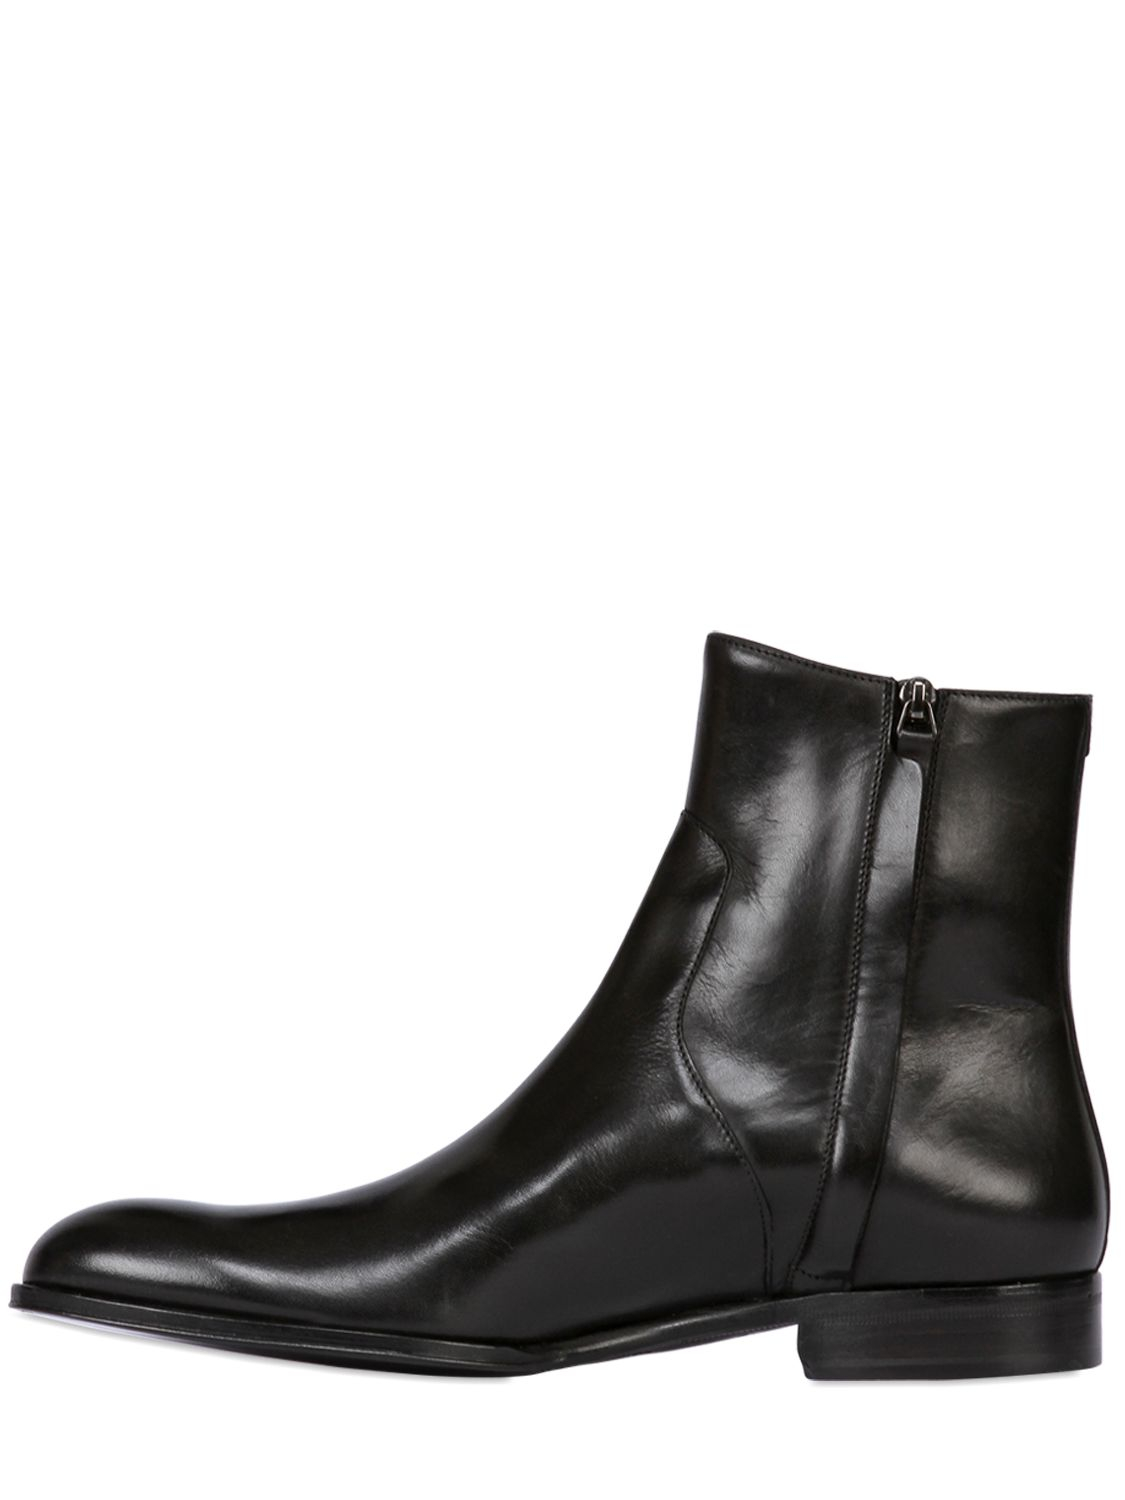 Lyst - Mr. hare Zip Up Leather Chelsea Boots in Black for Men